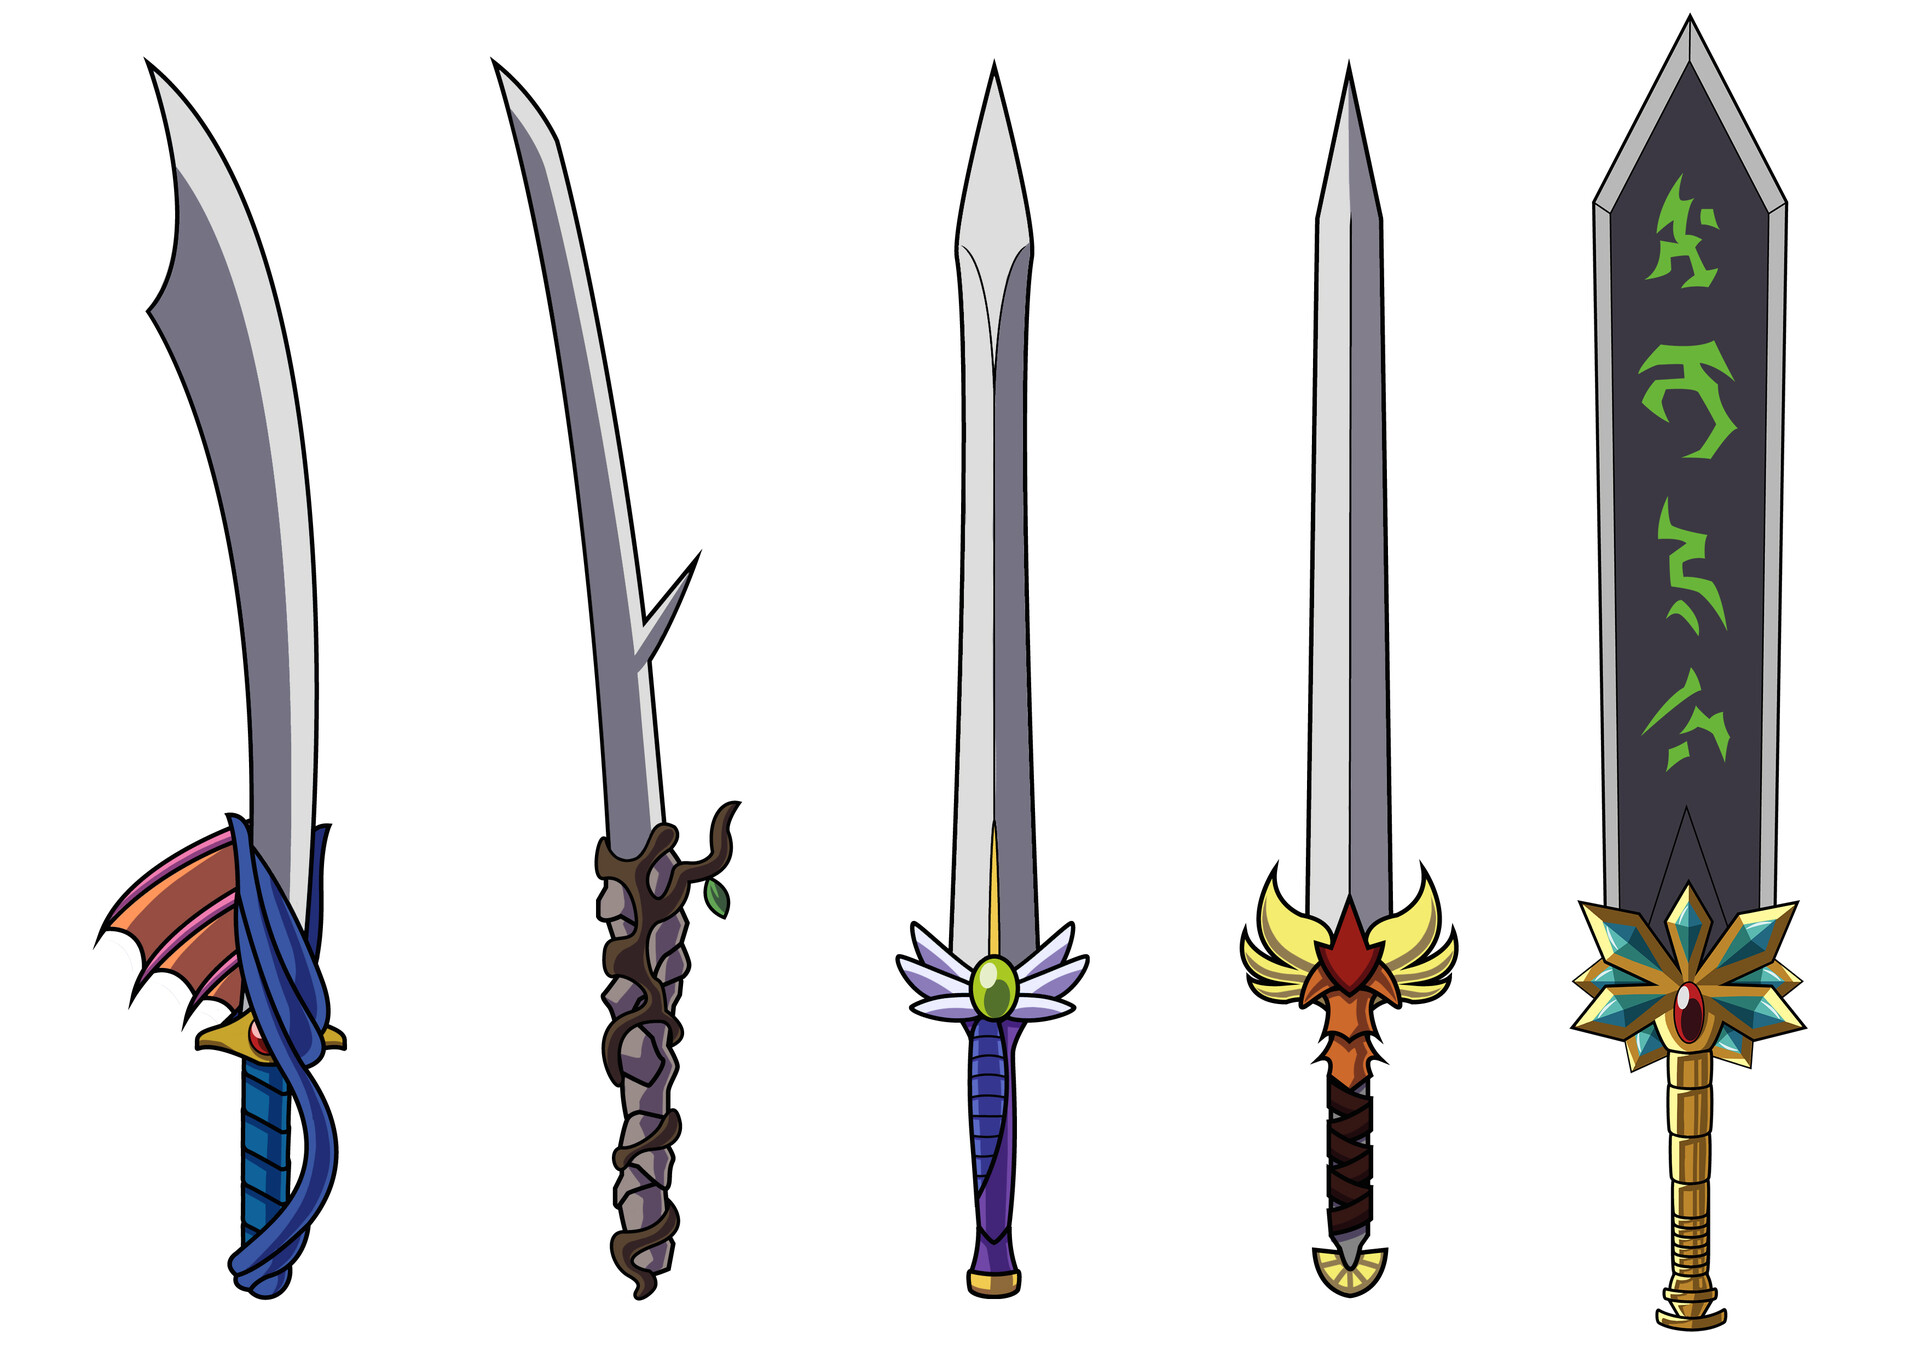 Concept &amp; Final art of character swords for indie games and ani...